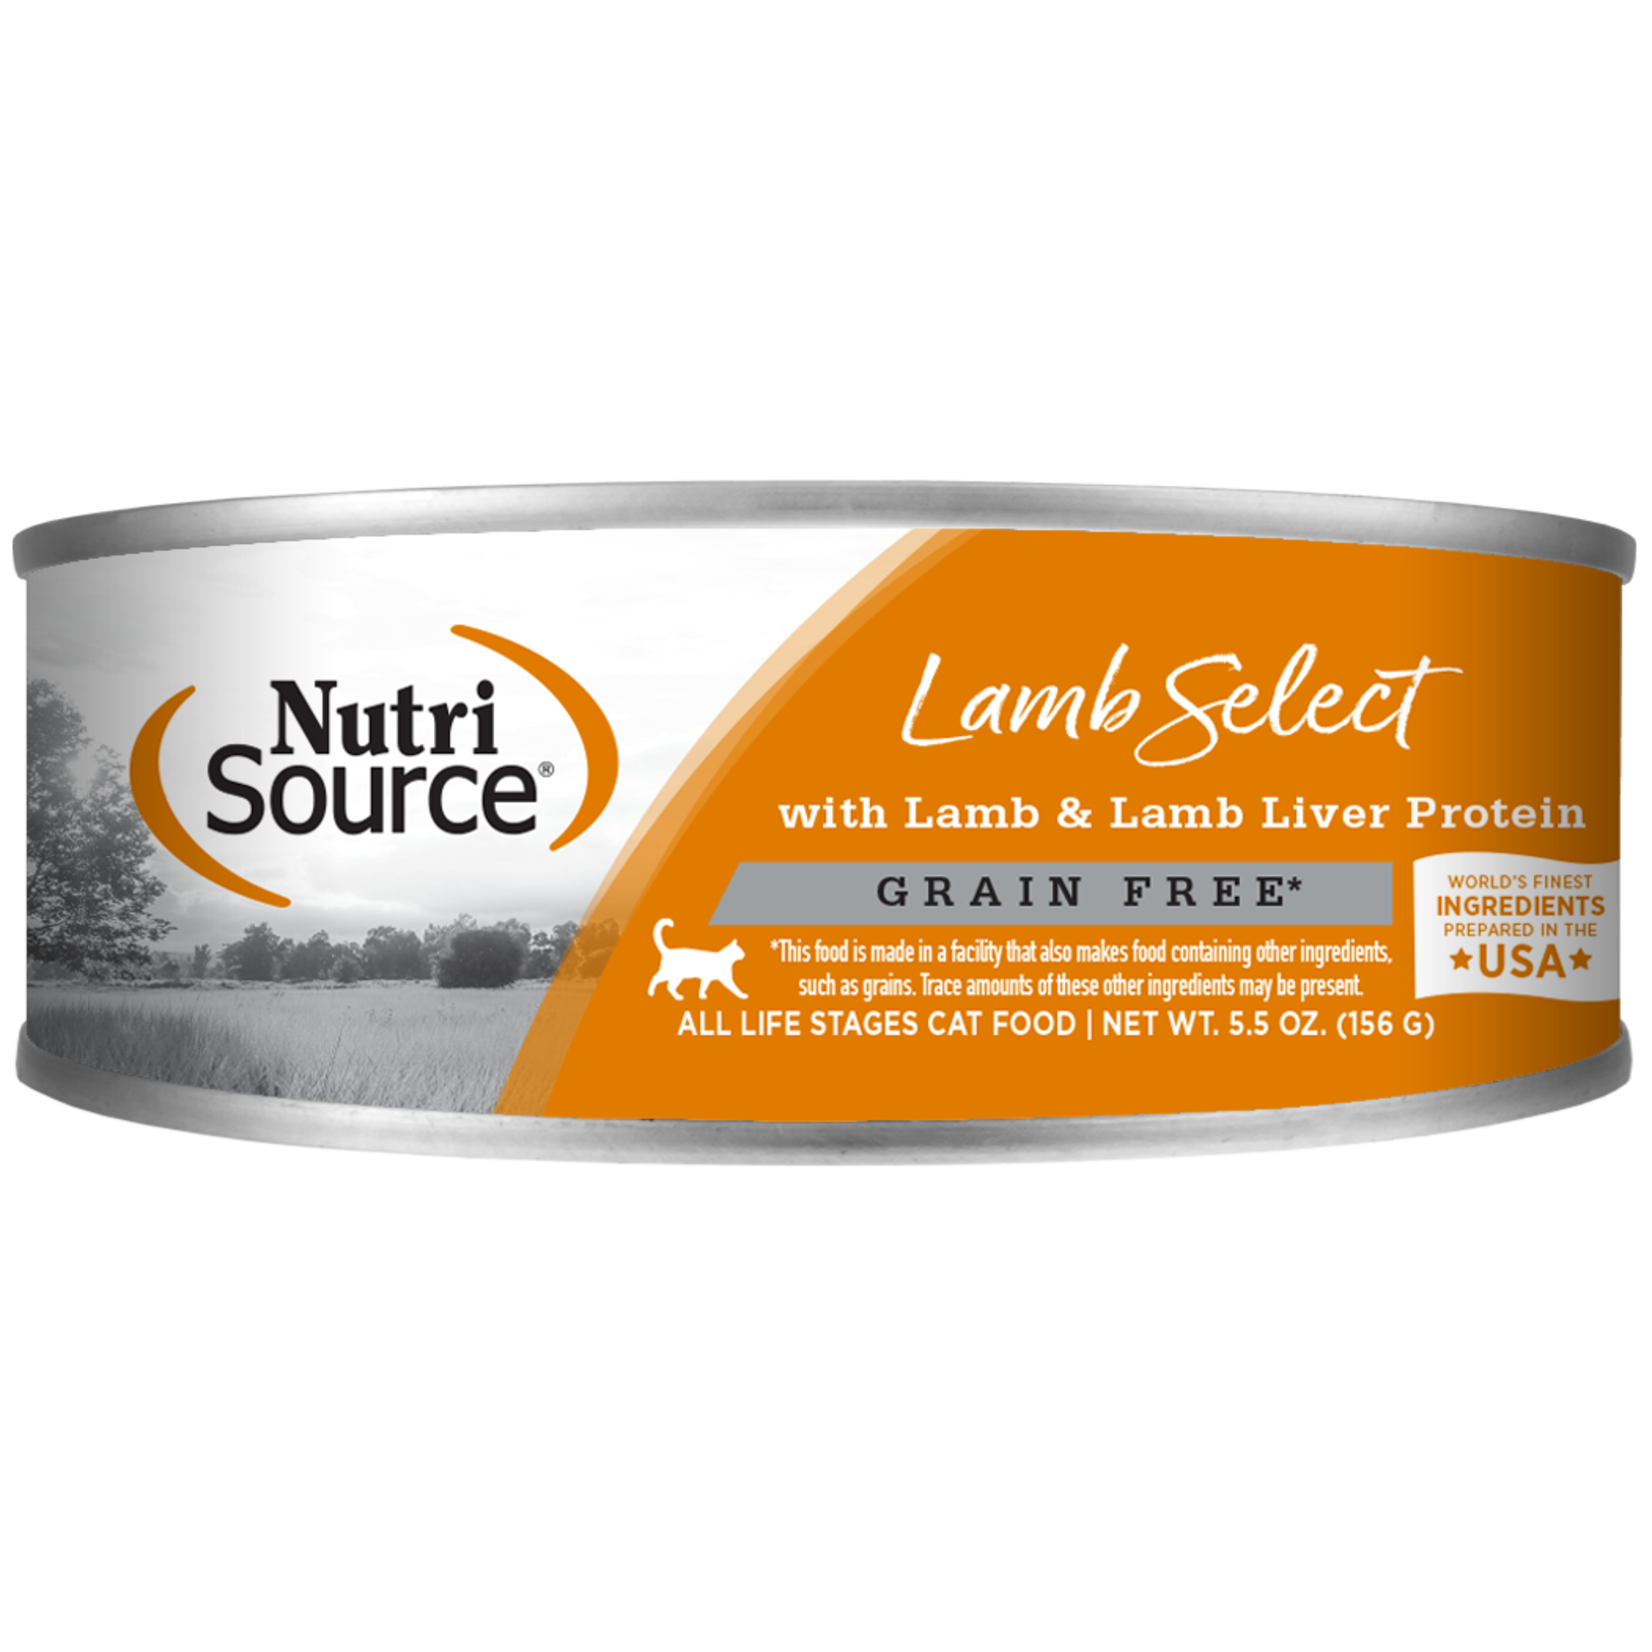 NutriSource Grain Free Lamb Select Grain Free Canned Cat Food, 5.5oz Can